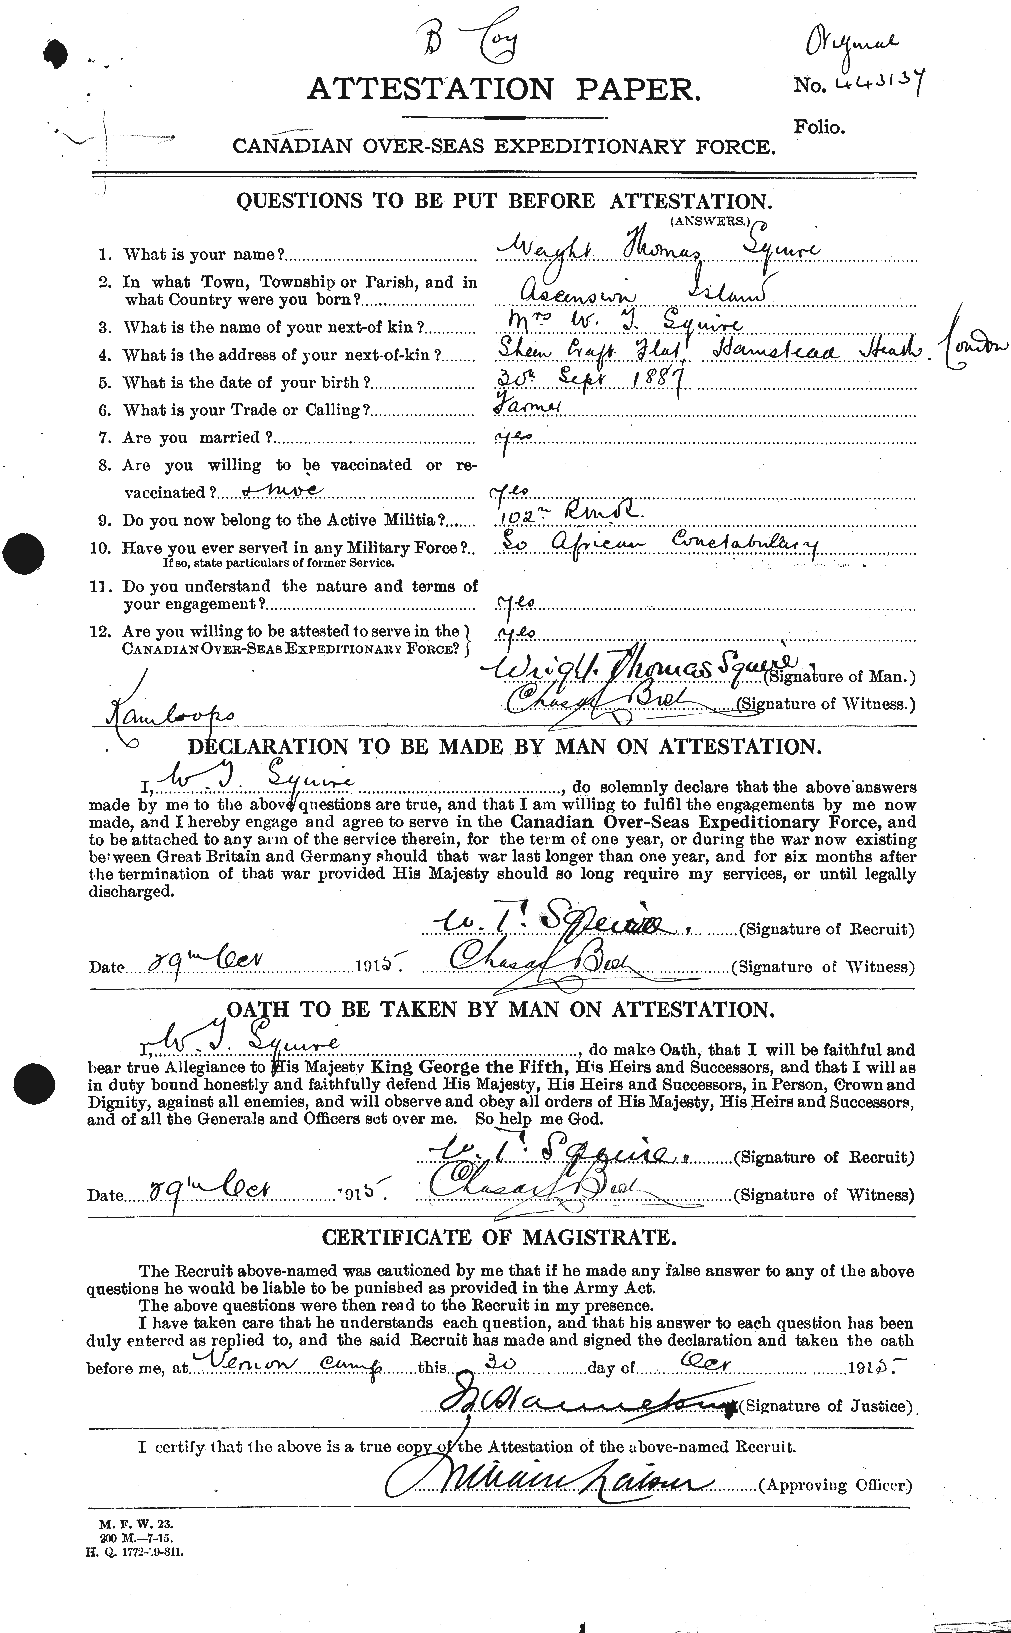 Personnel Records of the First World War - CEF 114687a